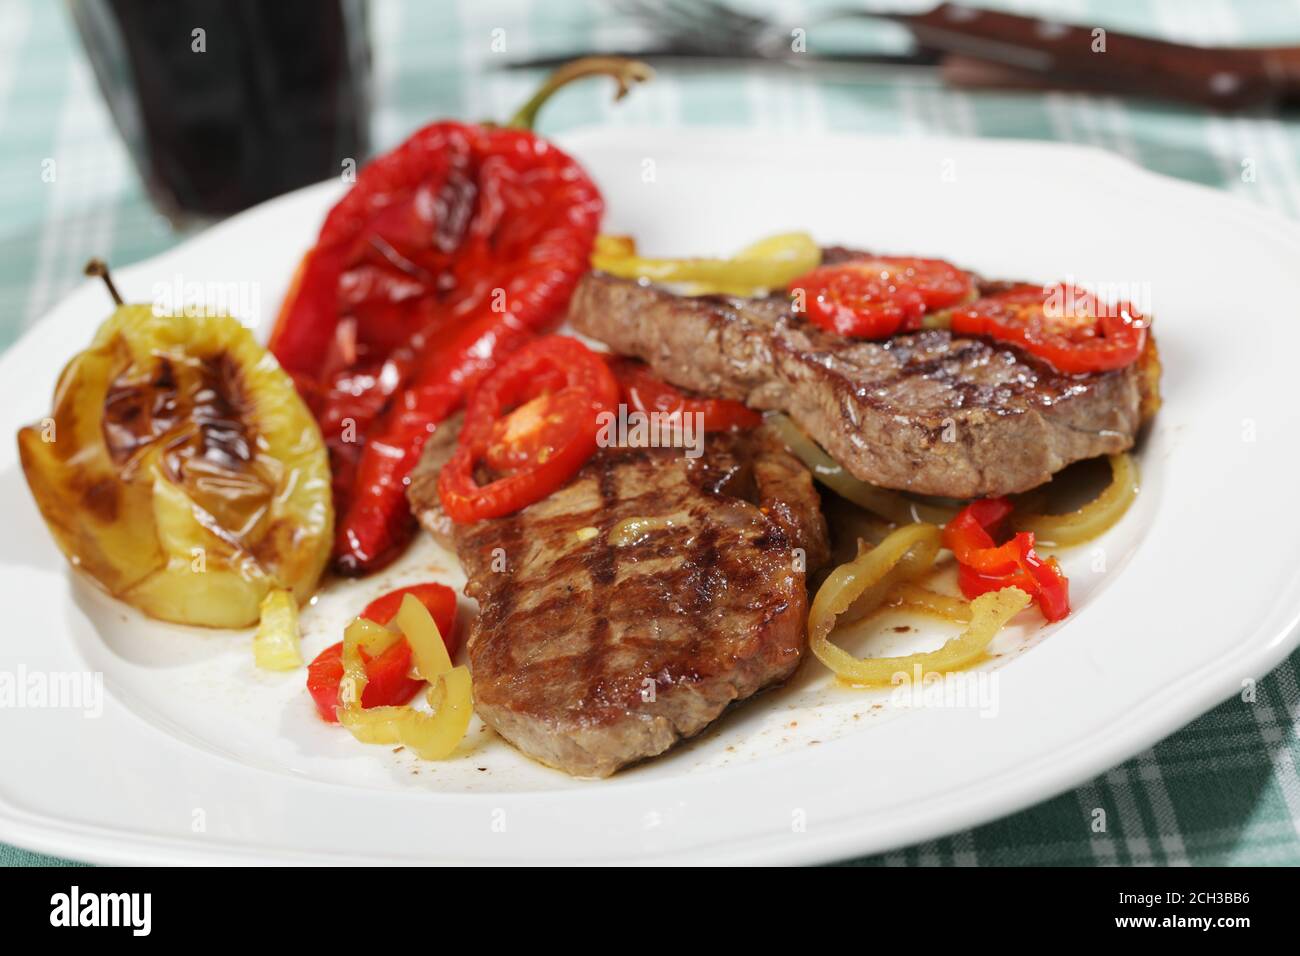 Grilled beef steaks with vegetables and red wine Stock Photo